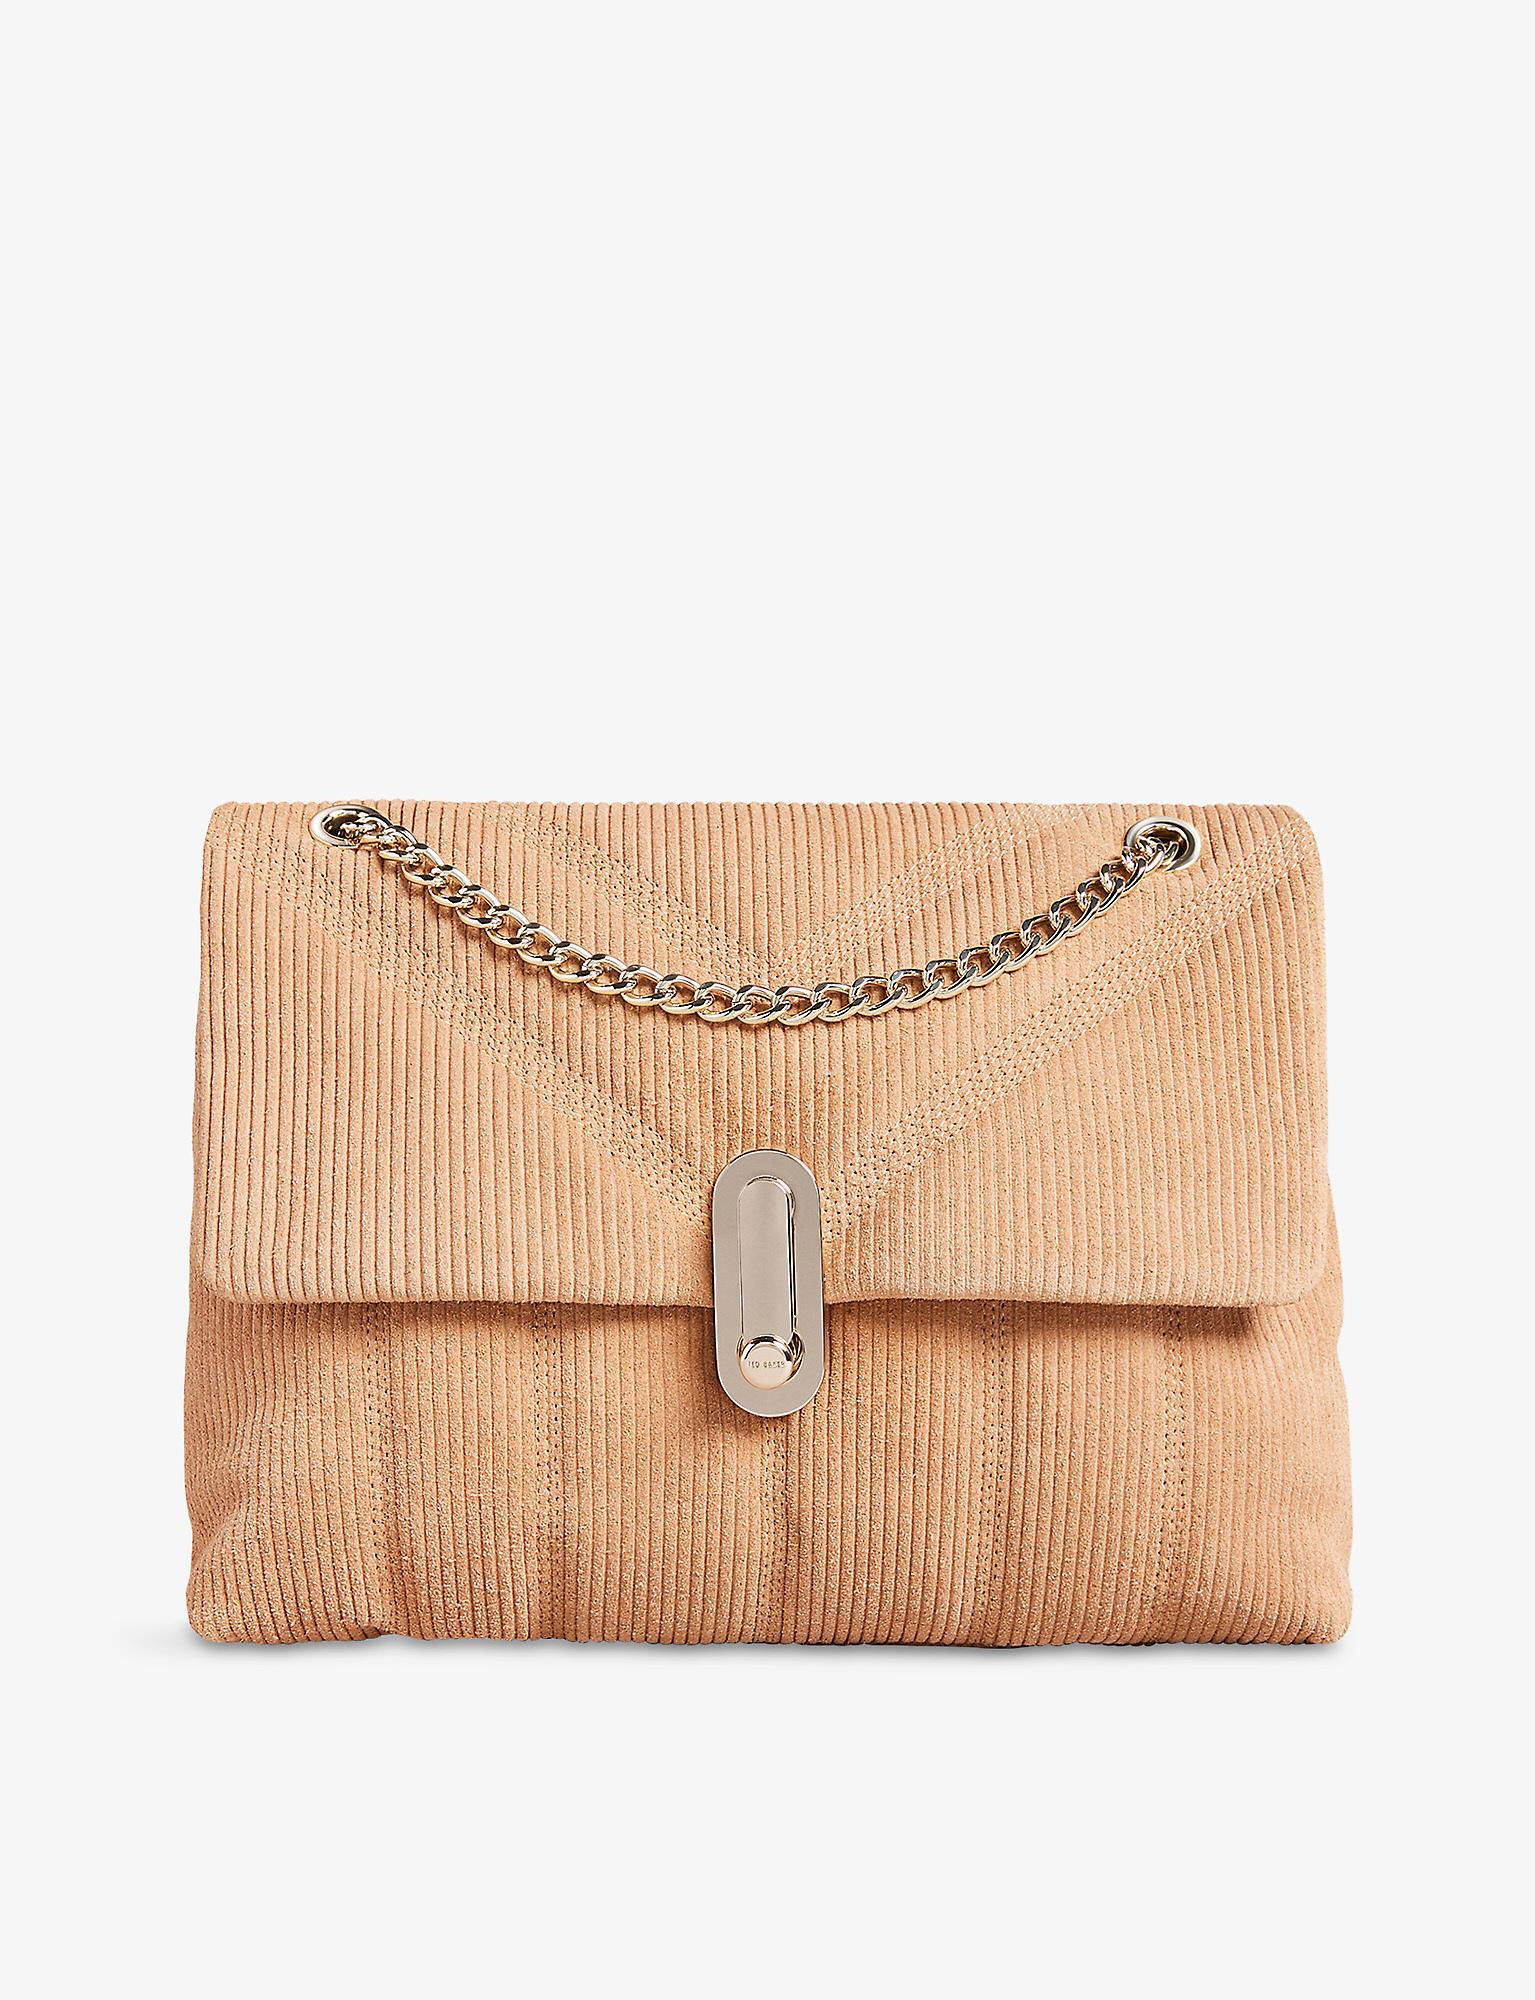 Ted Baker Ayalina Small Quilted Leather Cross-body Bag in Natural | Lyst